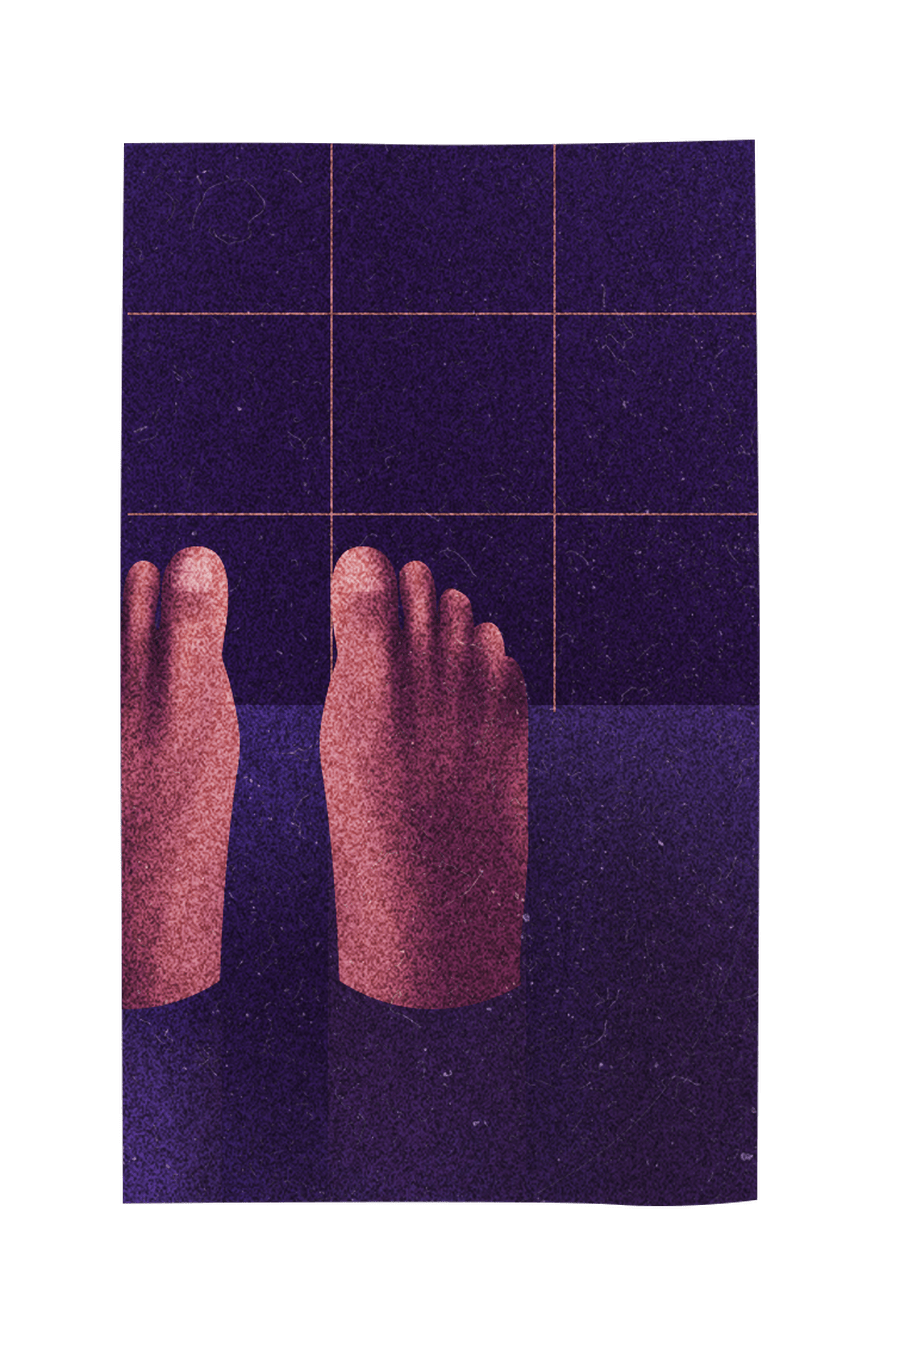 Illustration of feet emerging from purple bathwater. In the background, there is a tiled pattern on the bathroom wall.